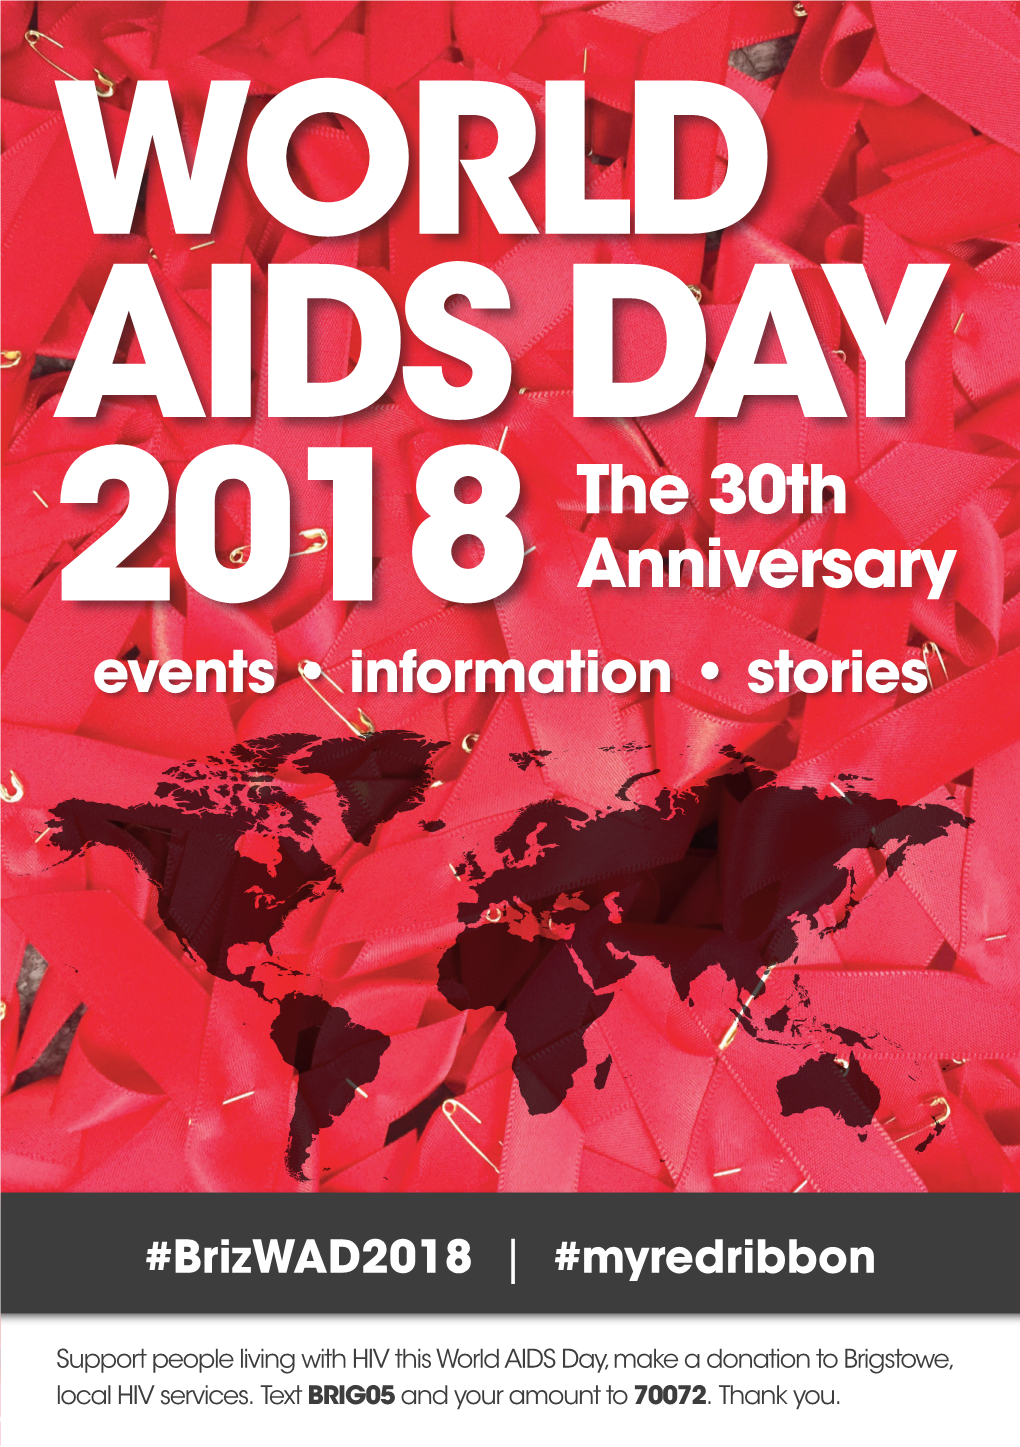 WORLD AIDS DAY 2018 the 30Th Anniversary